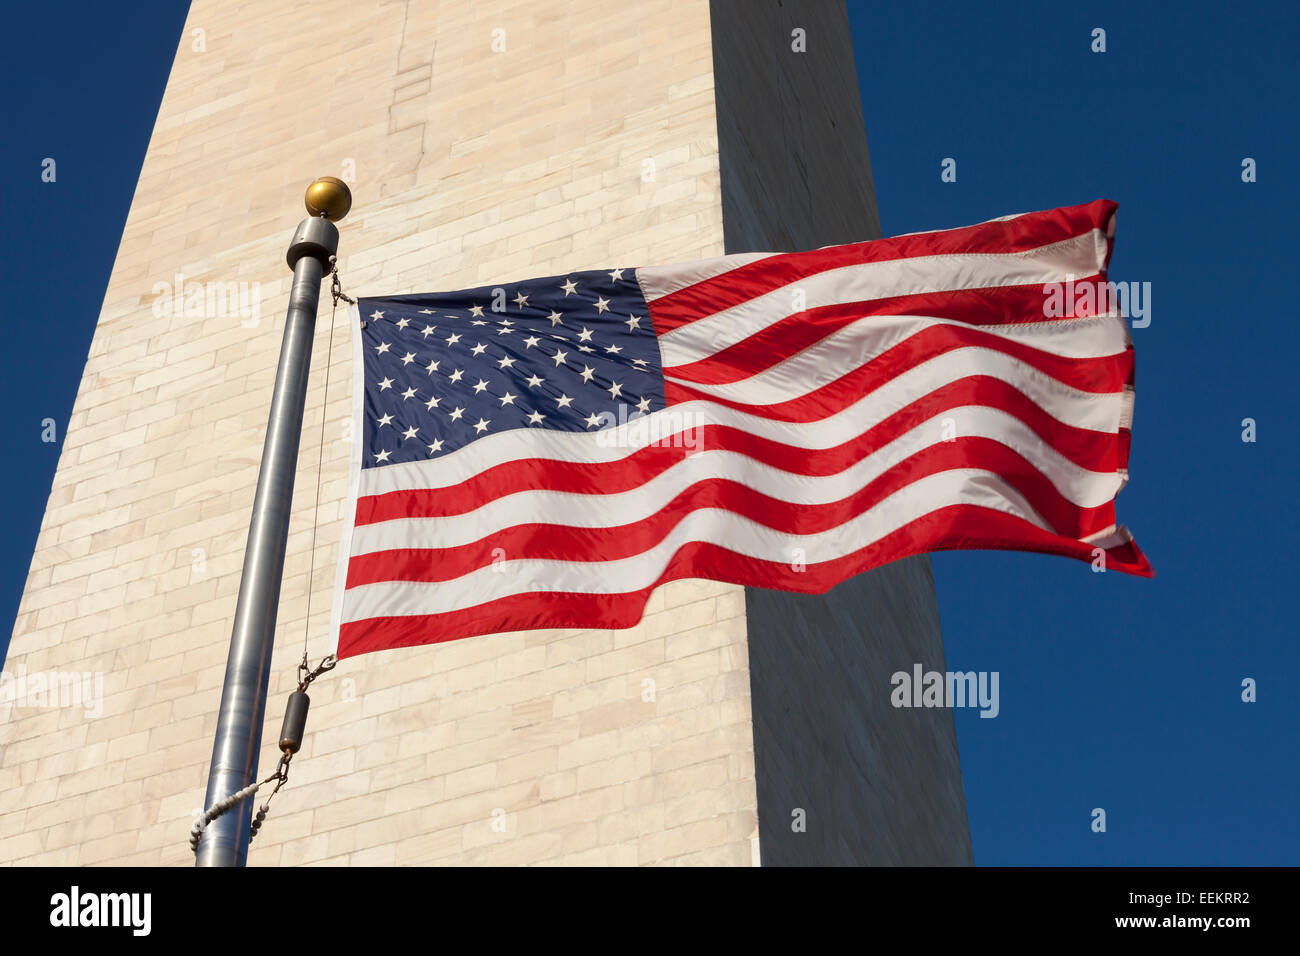 American flag blowing in the wind at the Washington Monument. Stock Photo